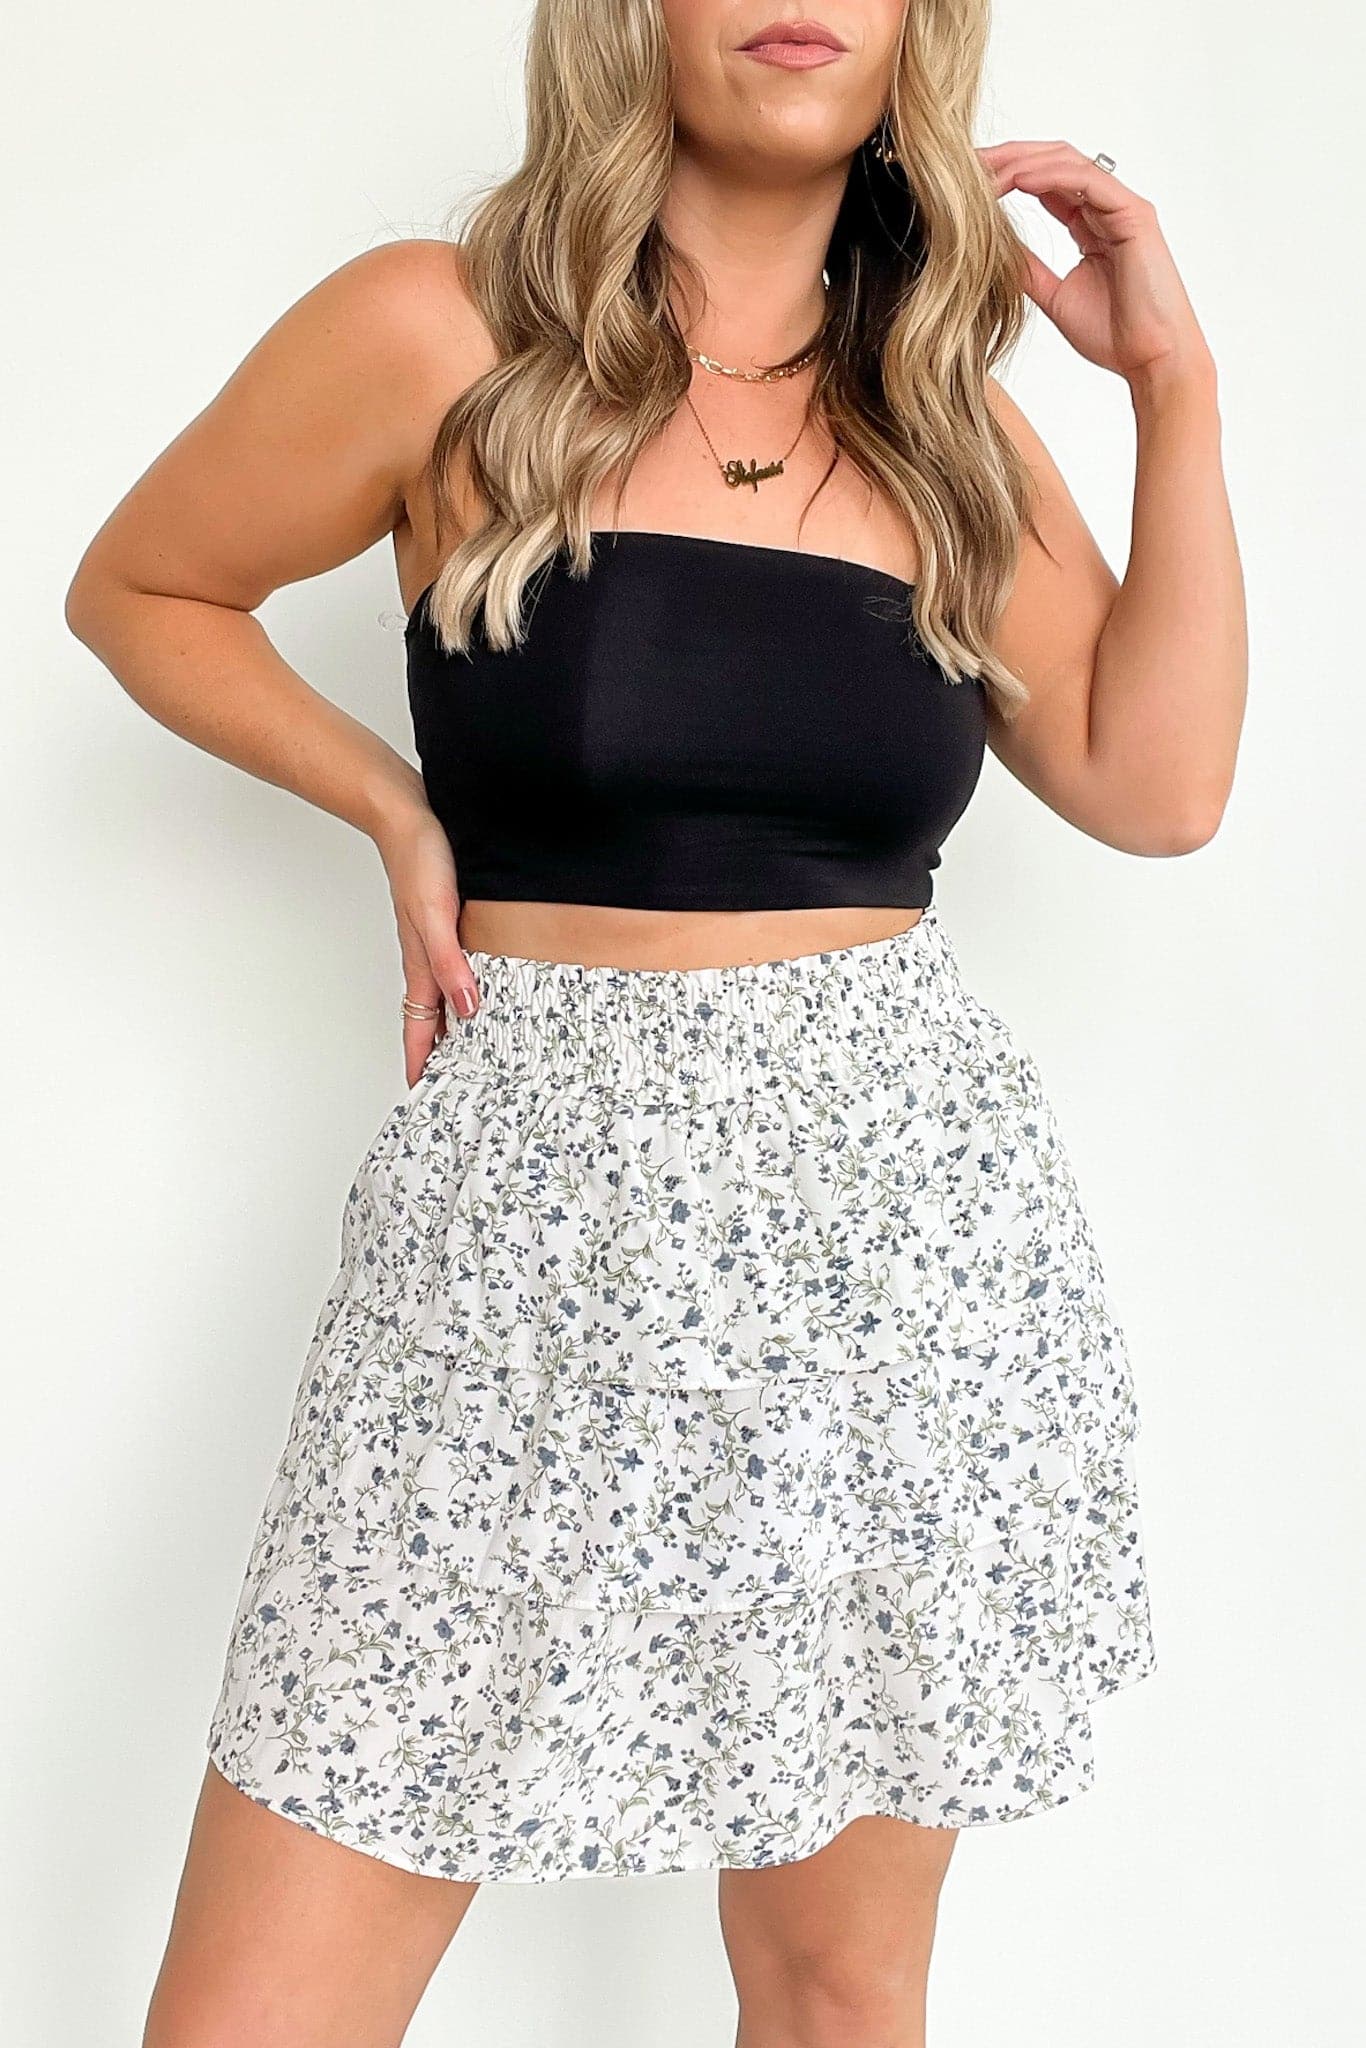  Easily Infatuated Double Lined Bandeau Top - FINAL SALE - Madison and Mallory